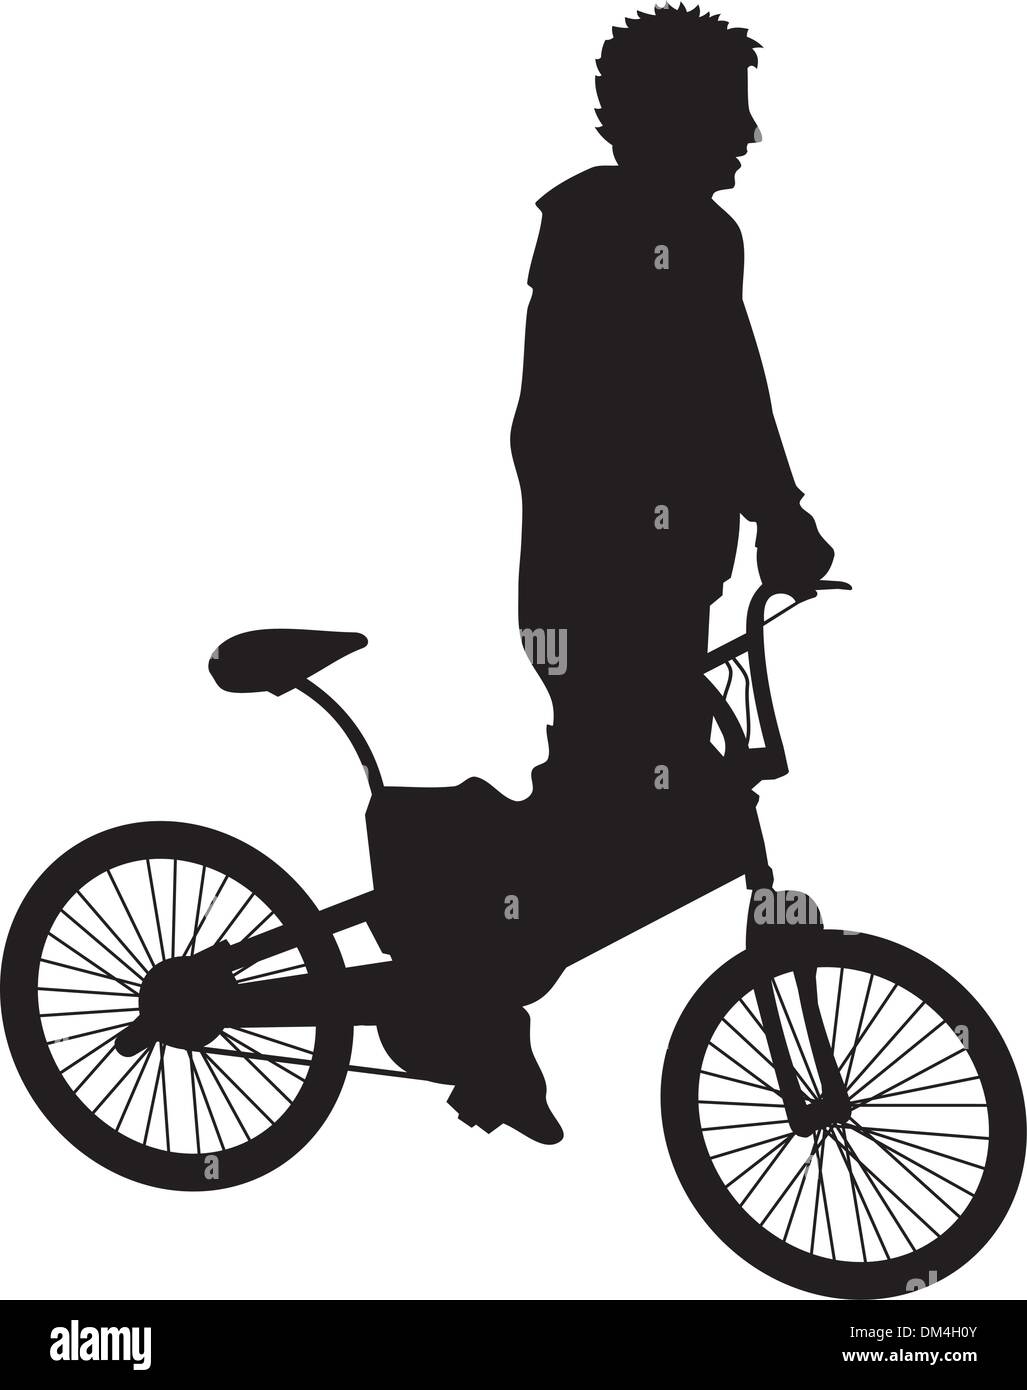 Bicycle rider 1 Stock Vector